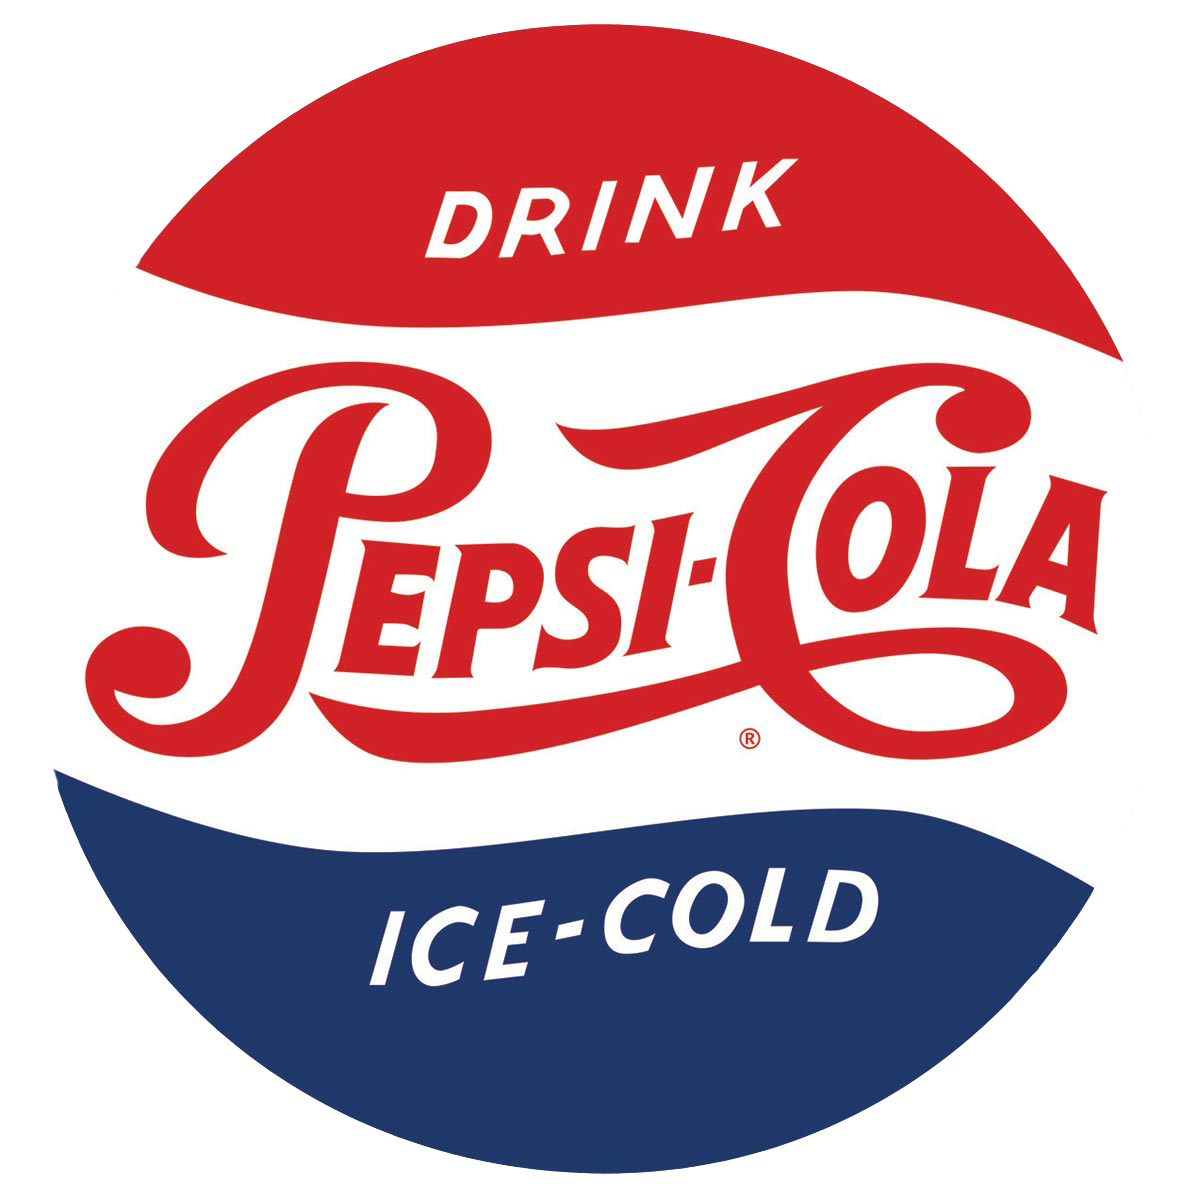 Classic Pepsi-Cola logo in red, white, and blue with "Drink" and "Ice-Cold" text on a circular tin sign.